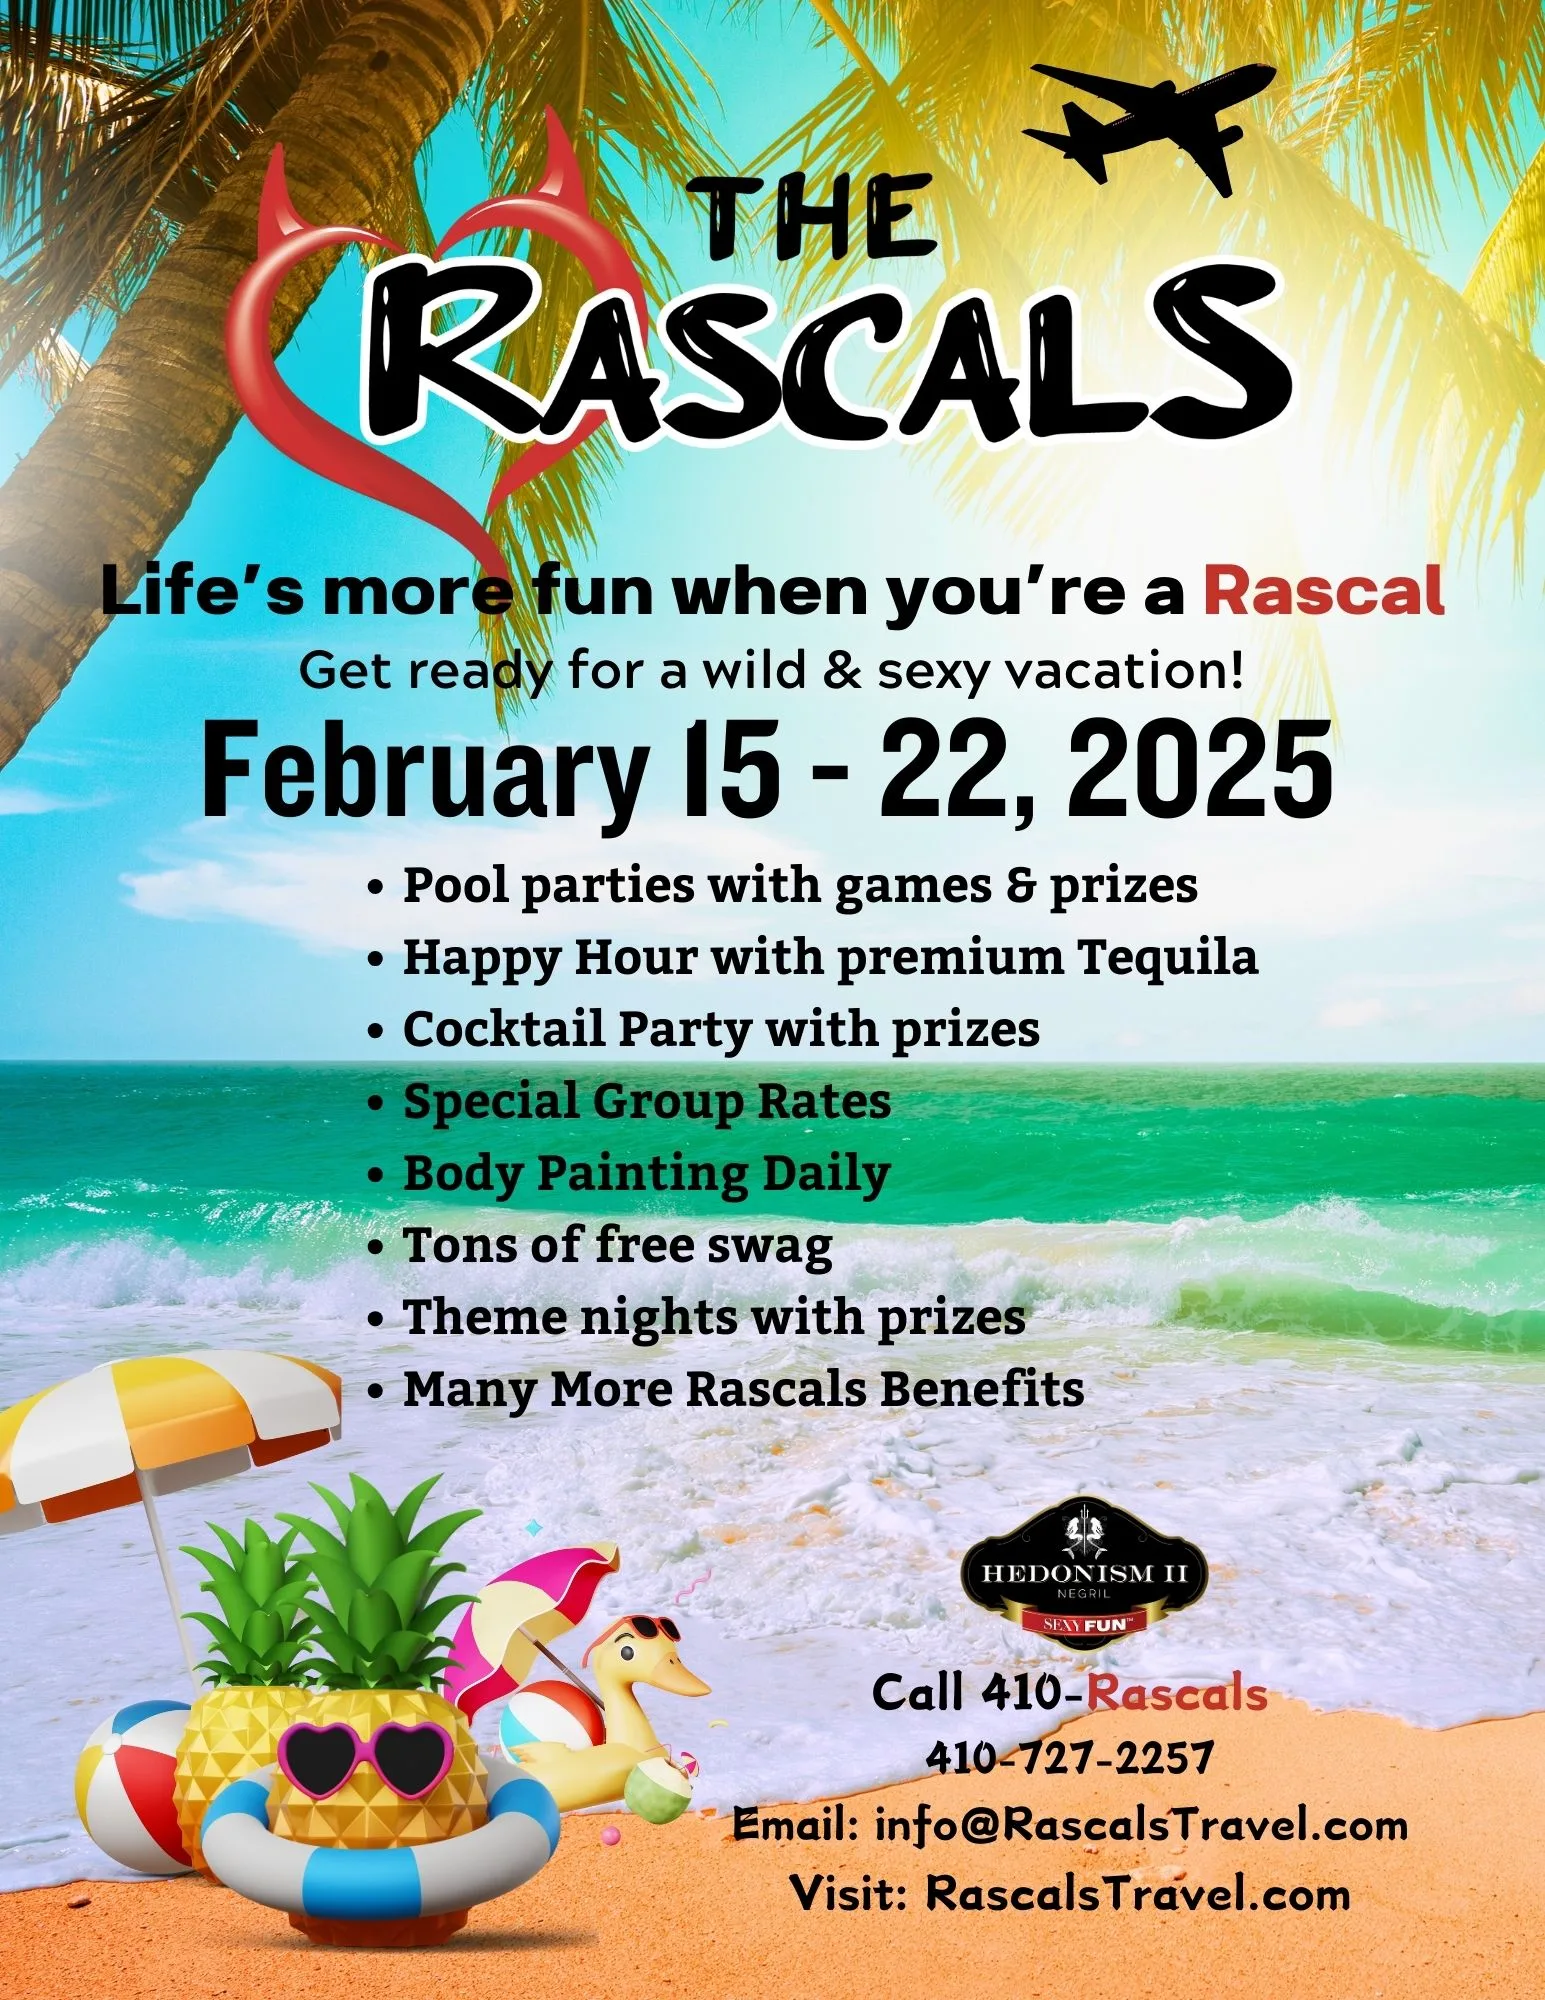 Group Event - The Rascals - February 15 - 22, 2025 - Hedonism II Resort, Negril Jamaica